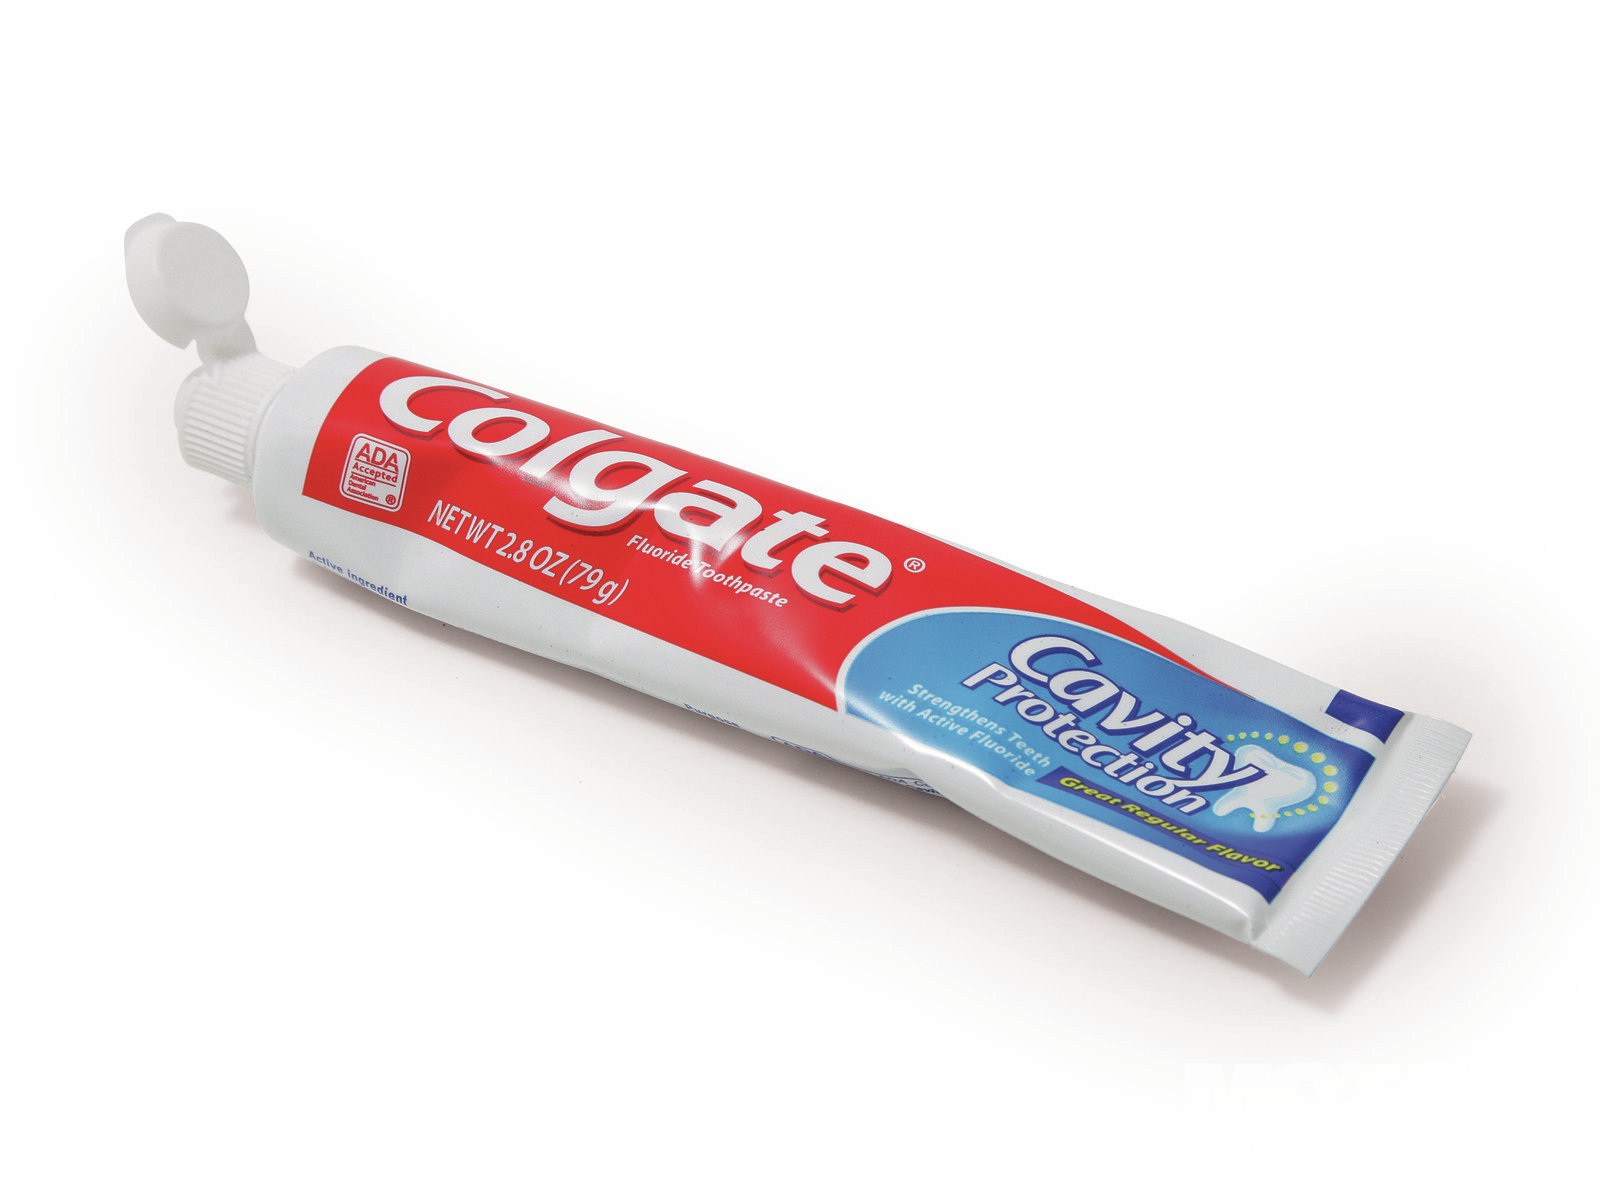 Funny toothpaste names